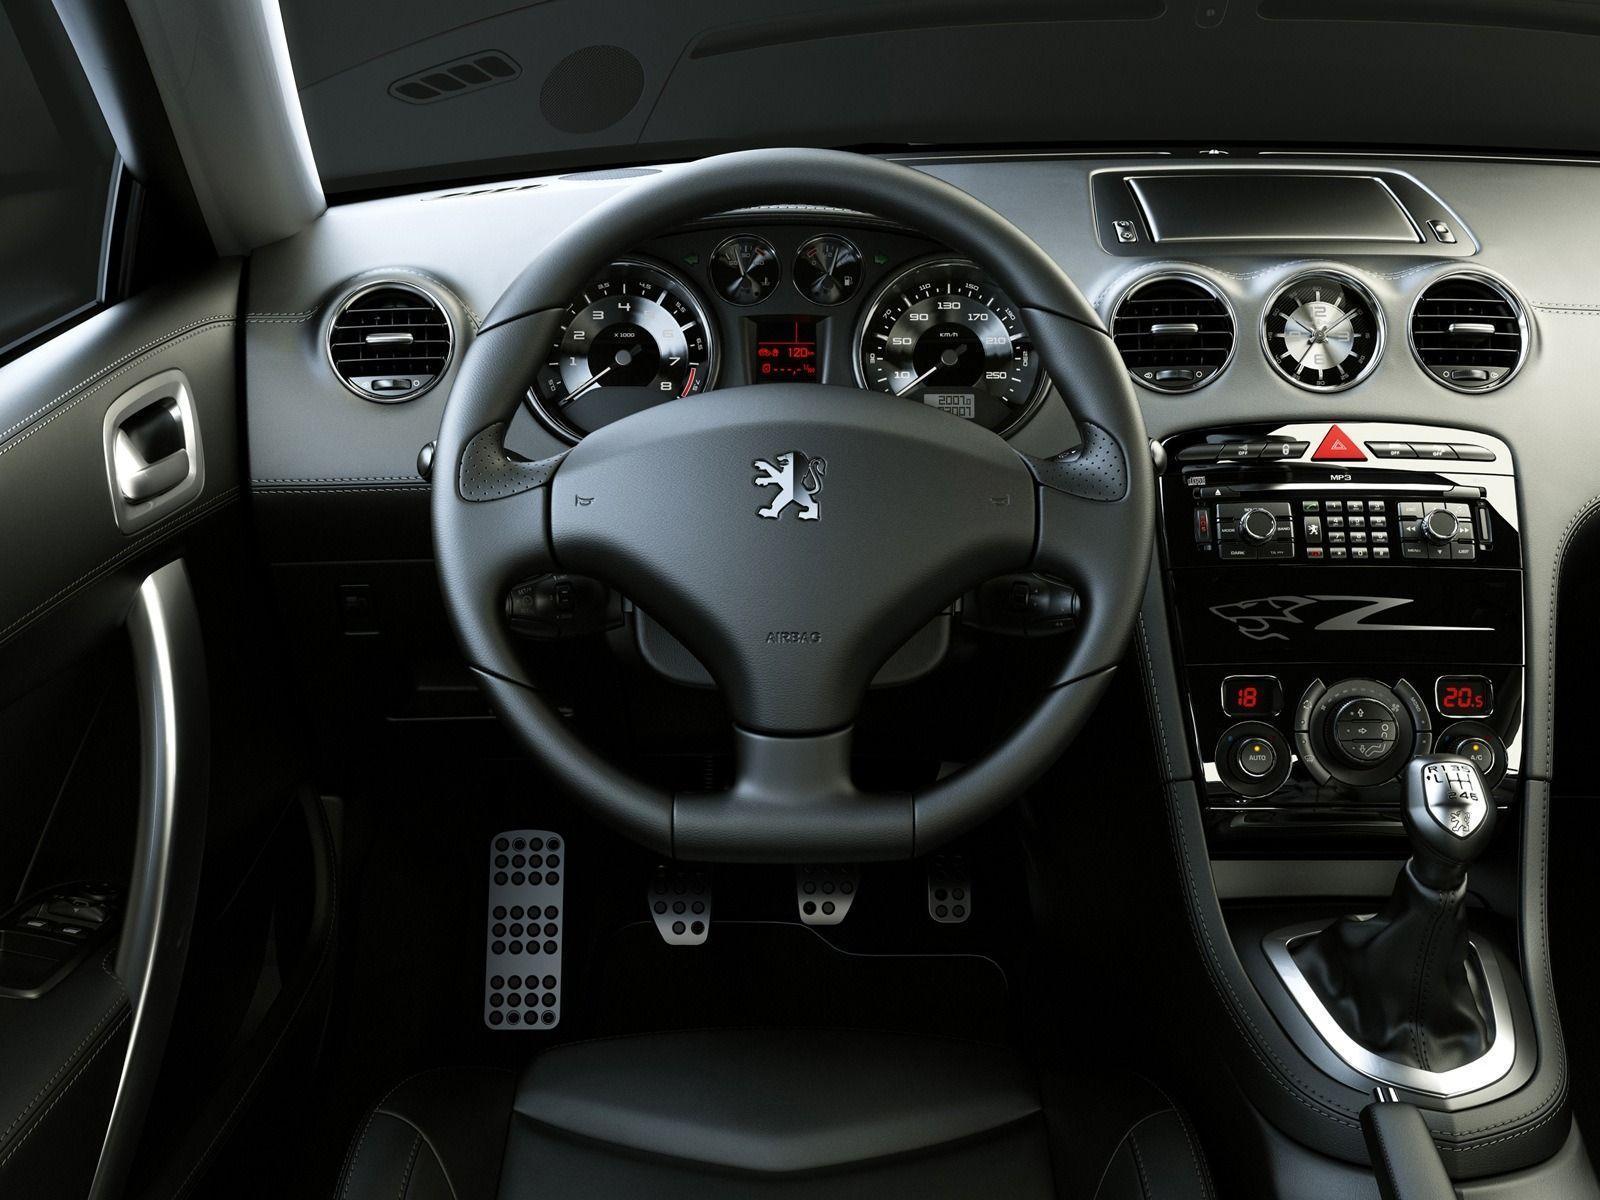 Peugeot wallpaper peugeot cars wallpaper for free download about